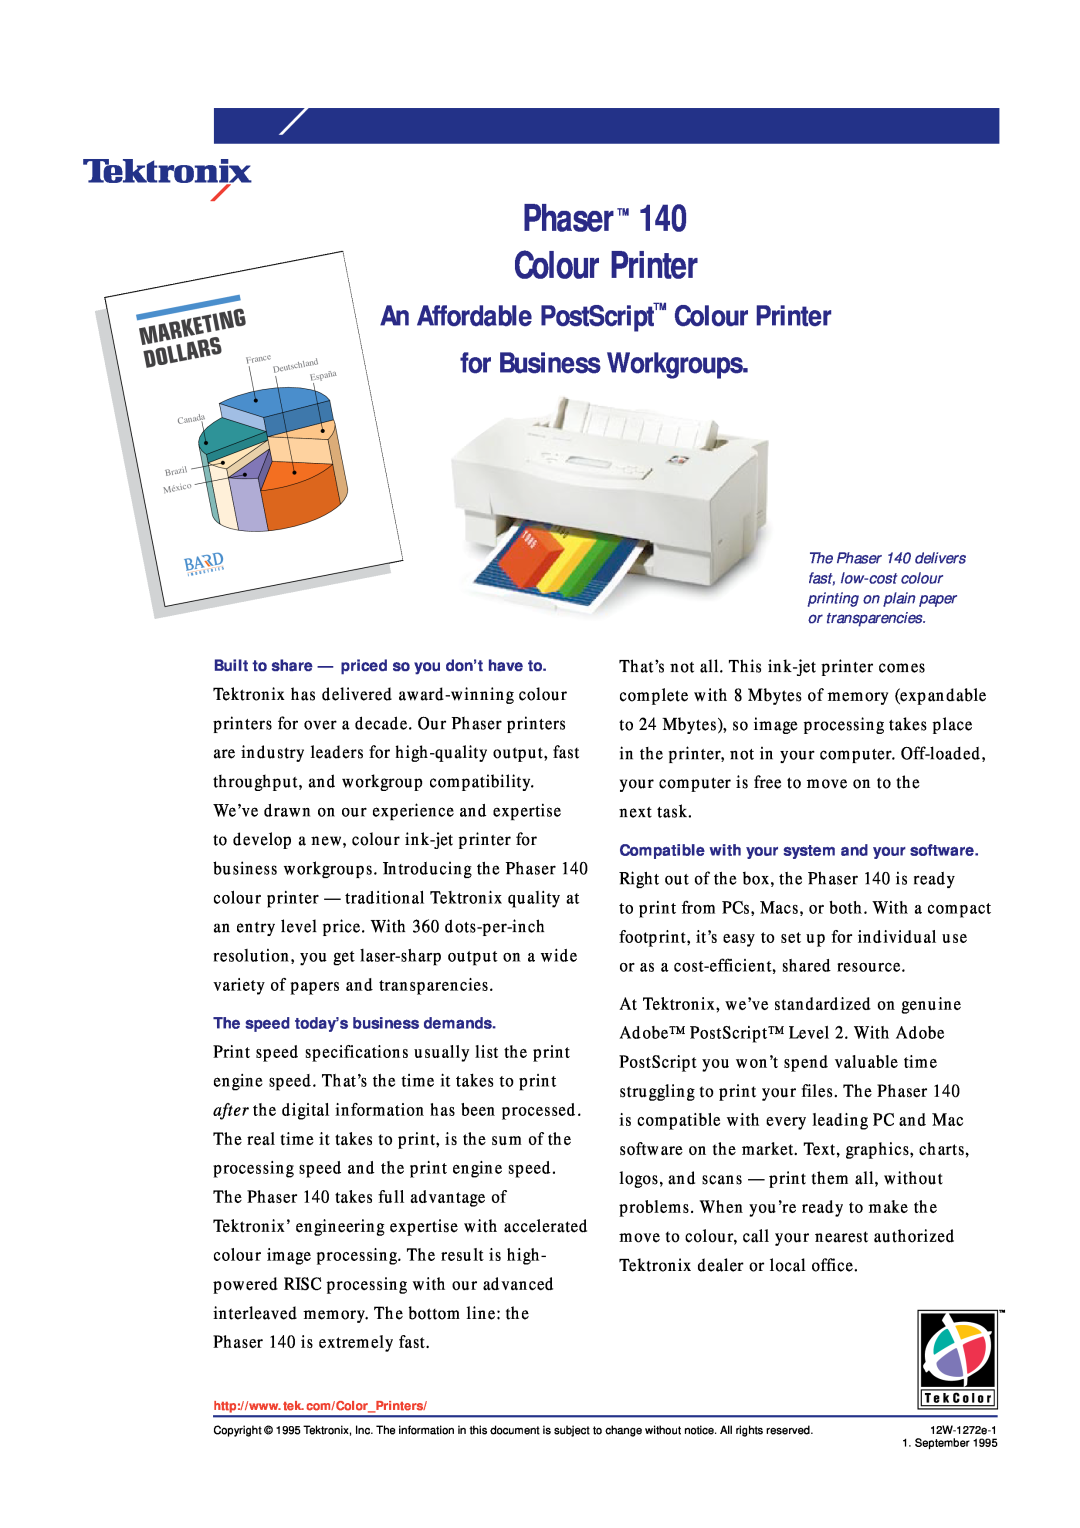 Xerox specifications An Affordable PostScript Colour Printer, for Business Workgroups, Phaser 140 Colour Printer 